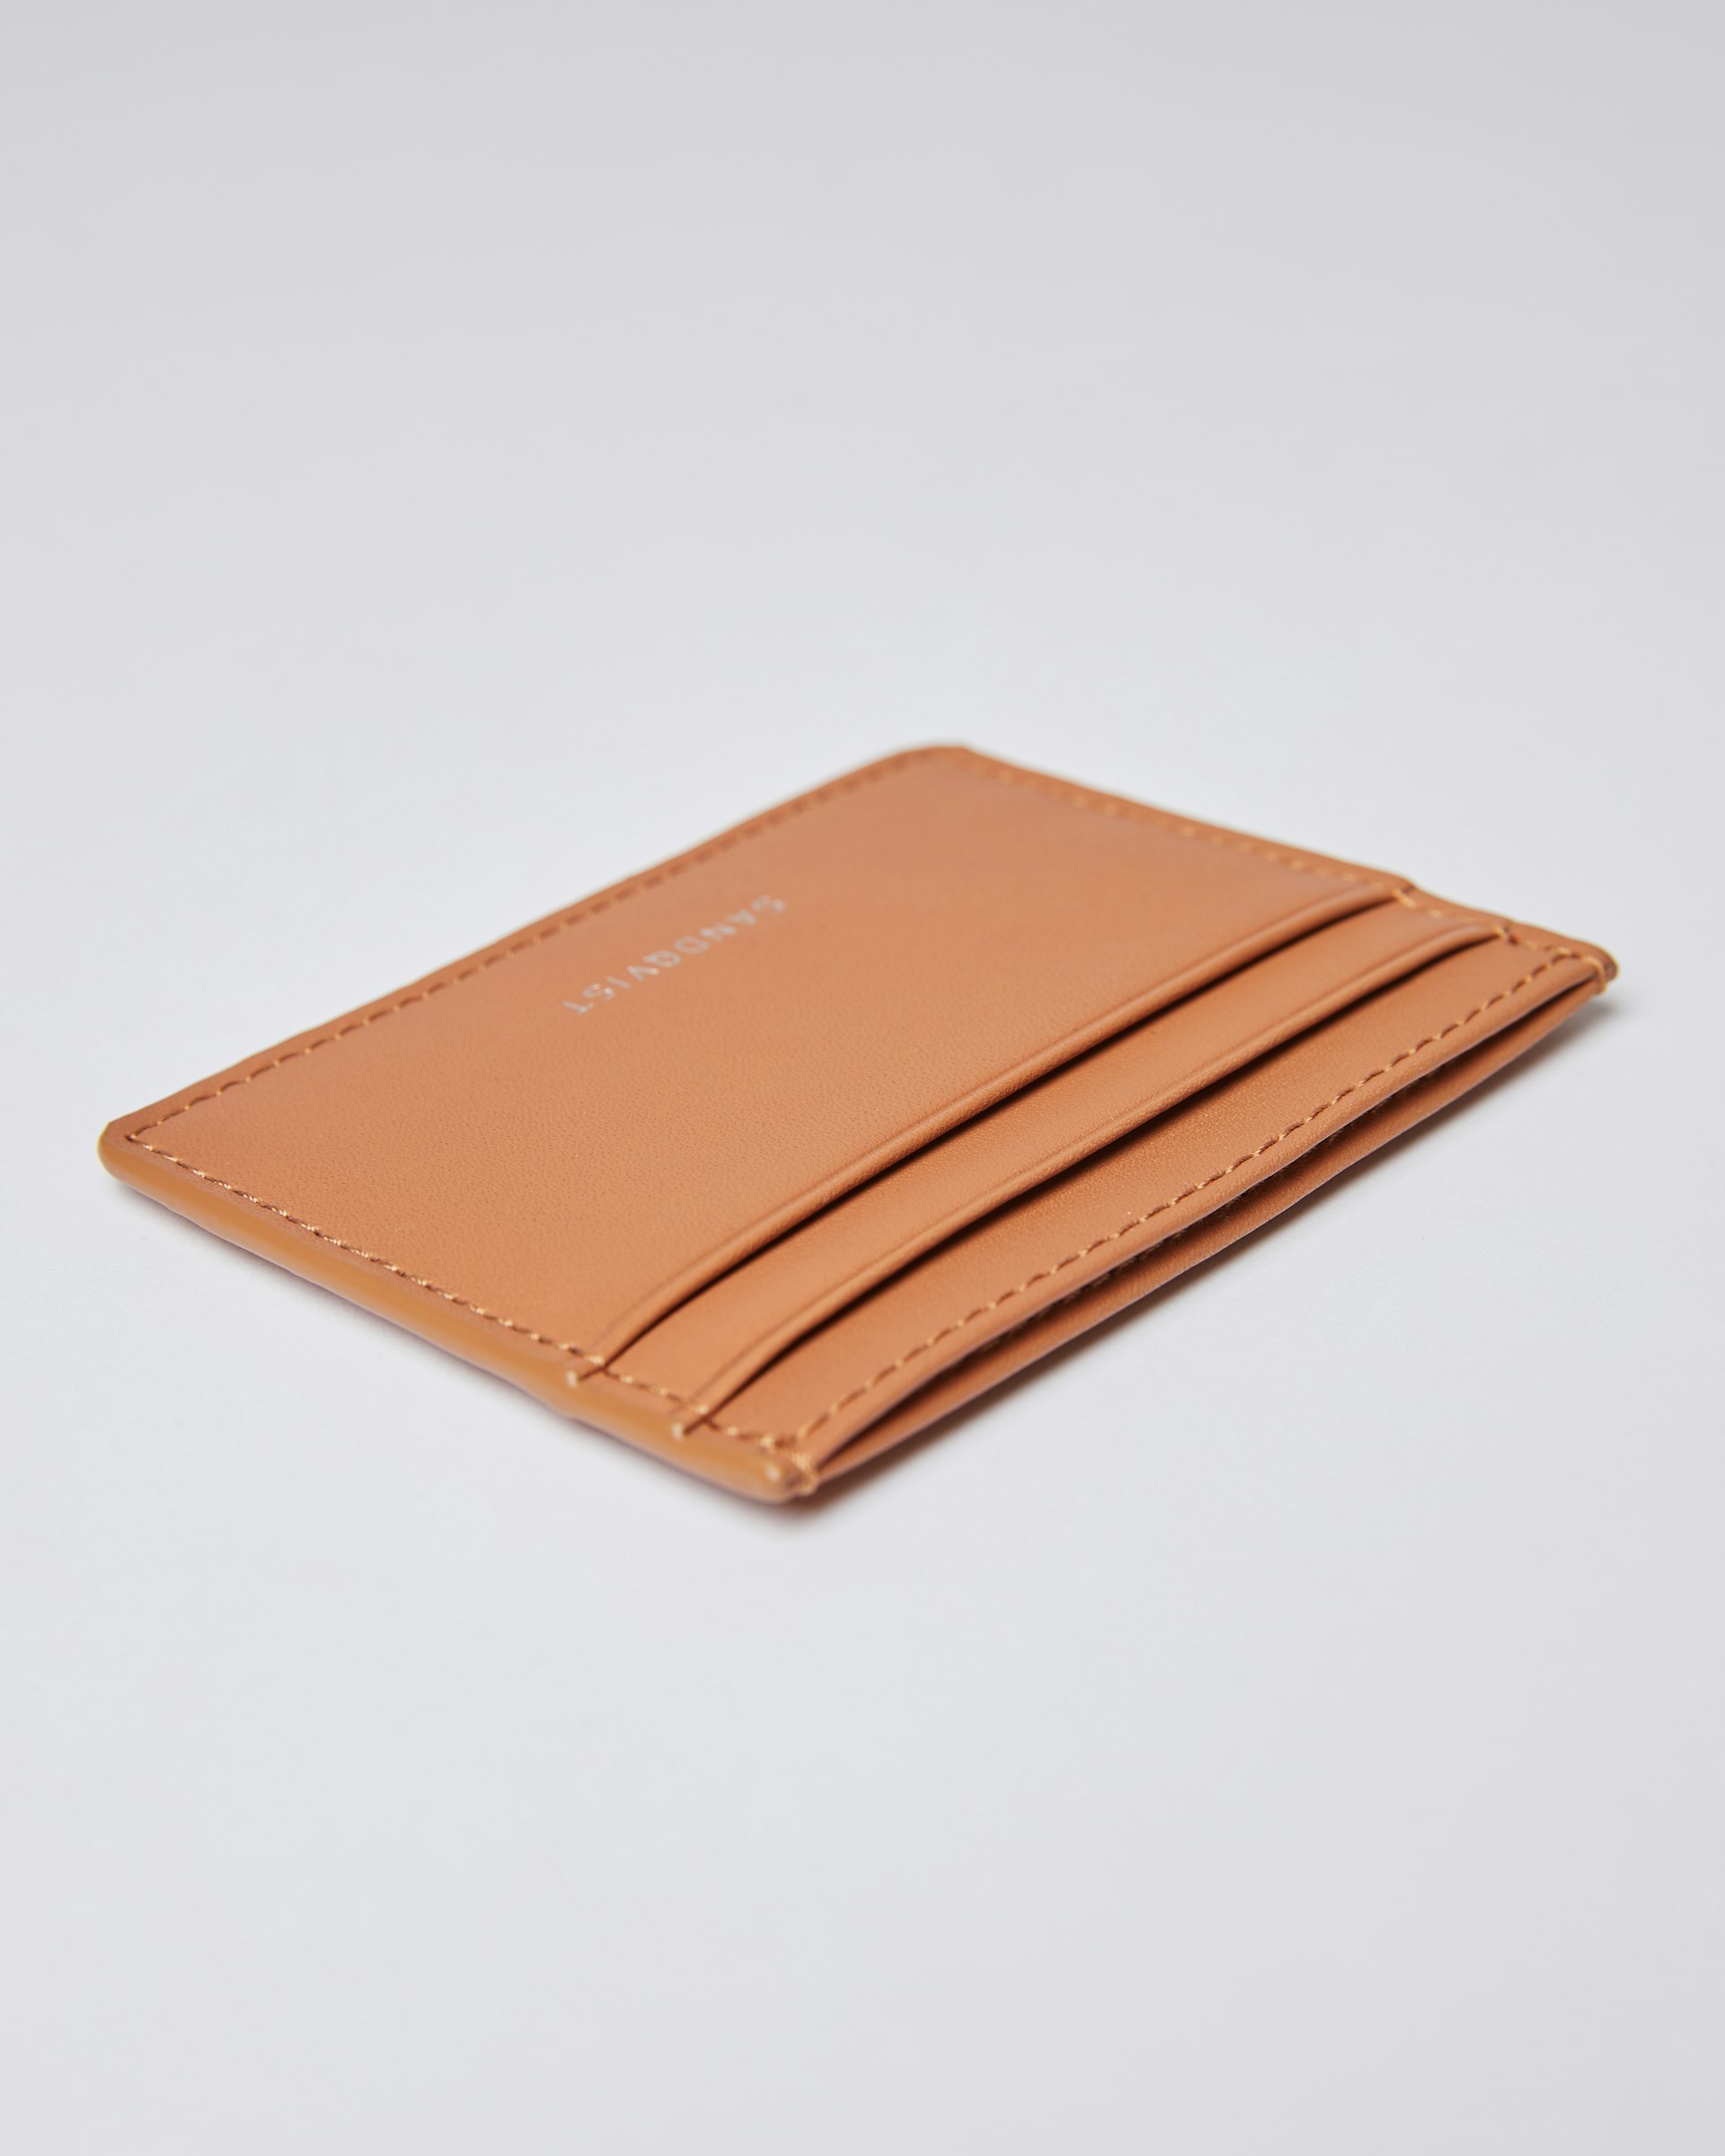 Fred belongs to the category Wallets and is in color toffee (2 of 3)